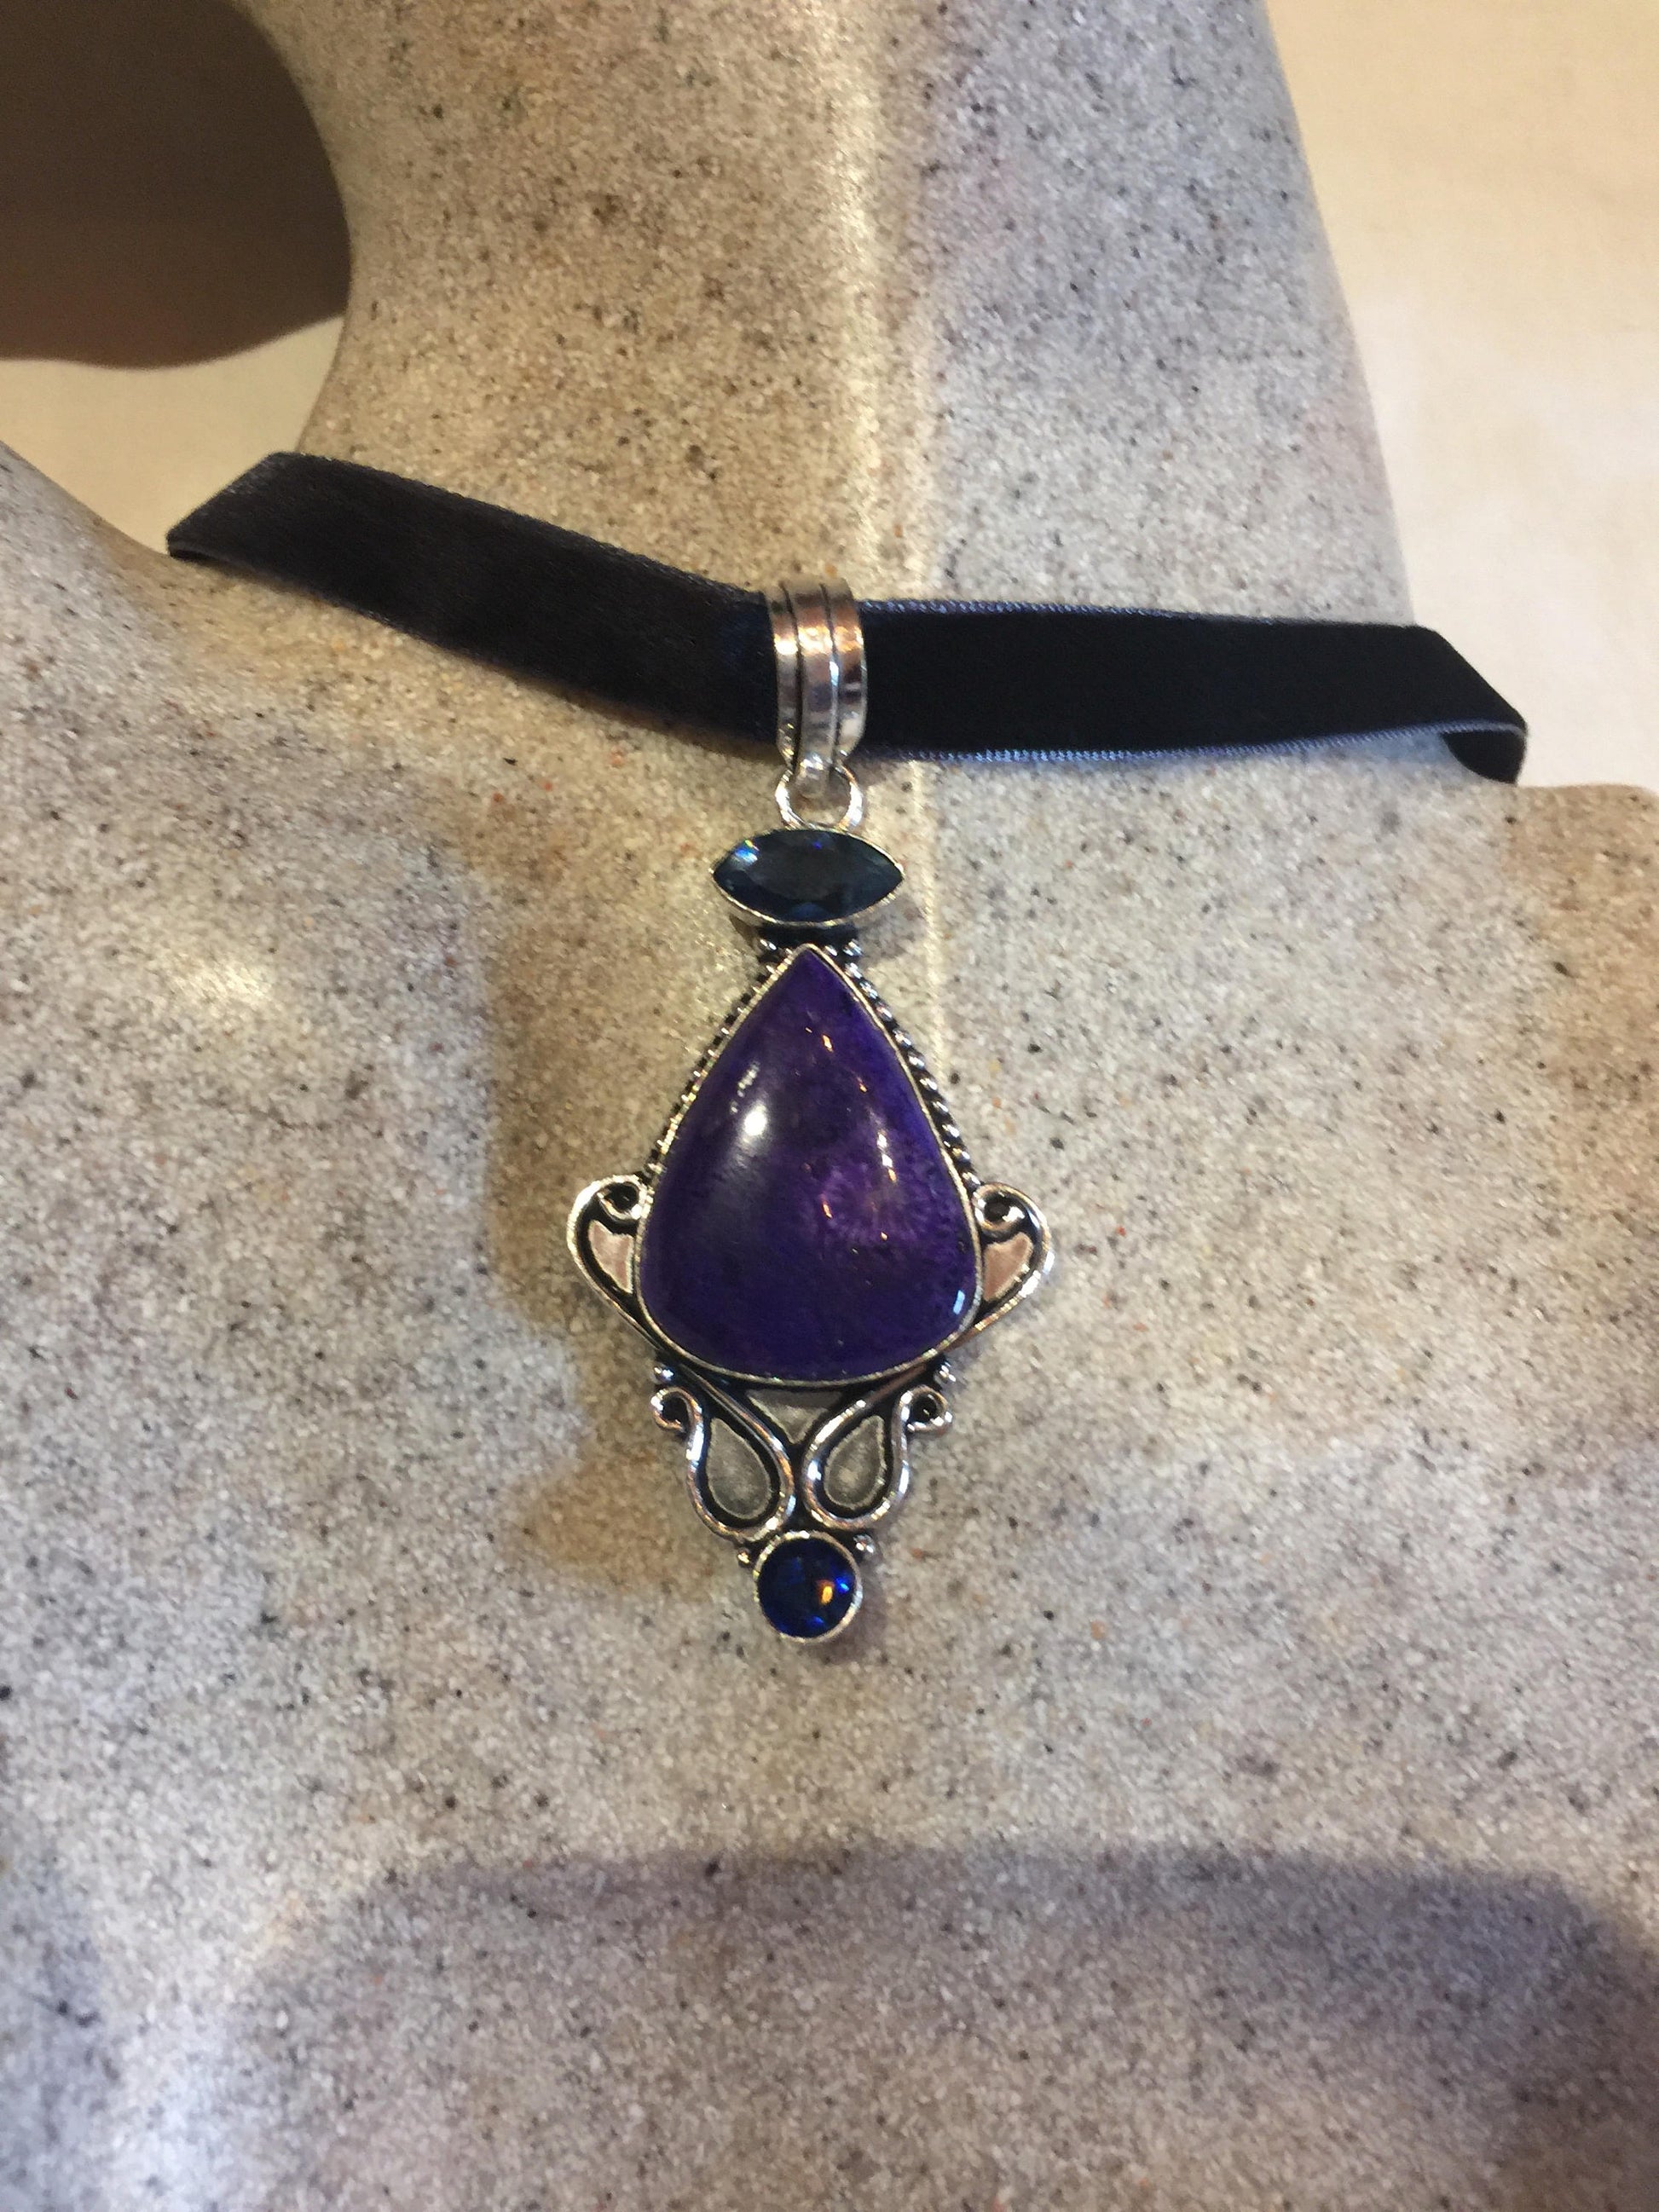 Blue Handmade Gothic Styled Silver Finished Genuine Iolite and Sujalite Choker Necklace